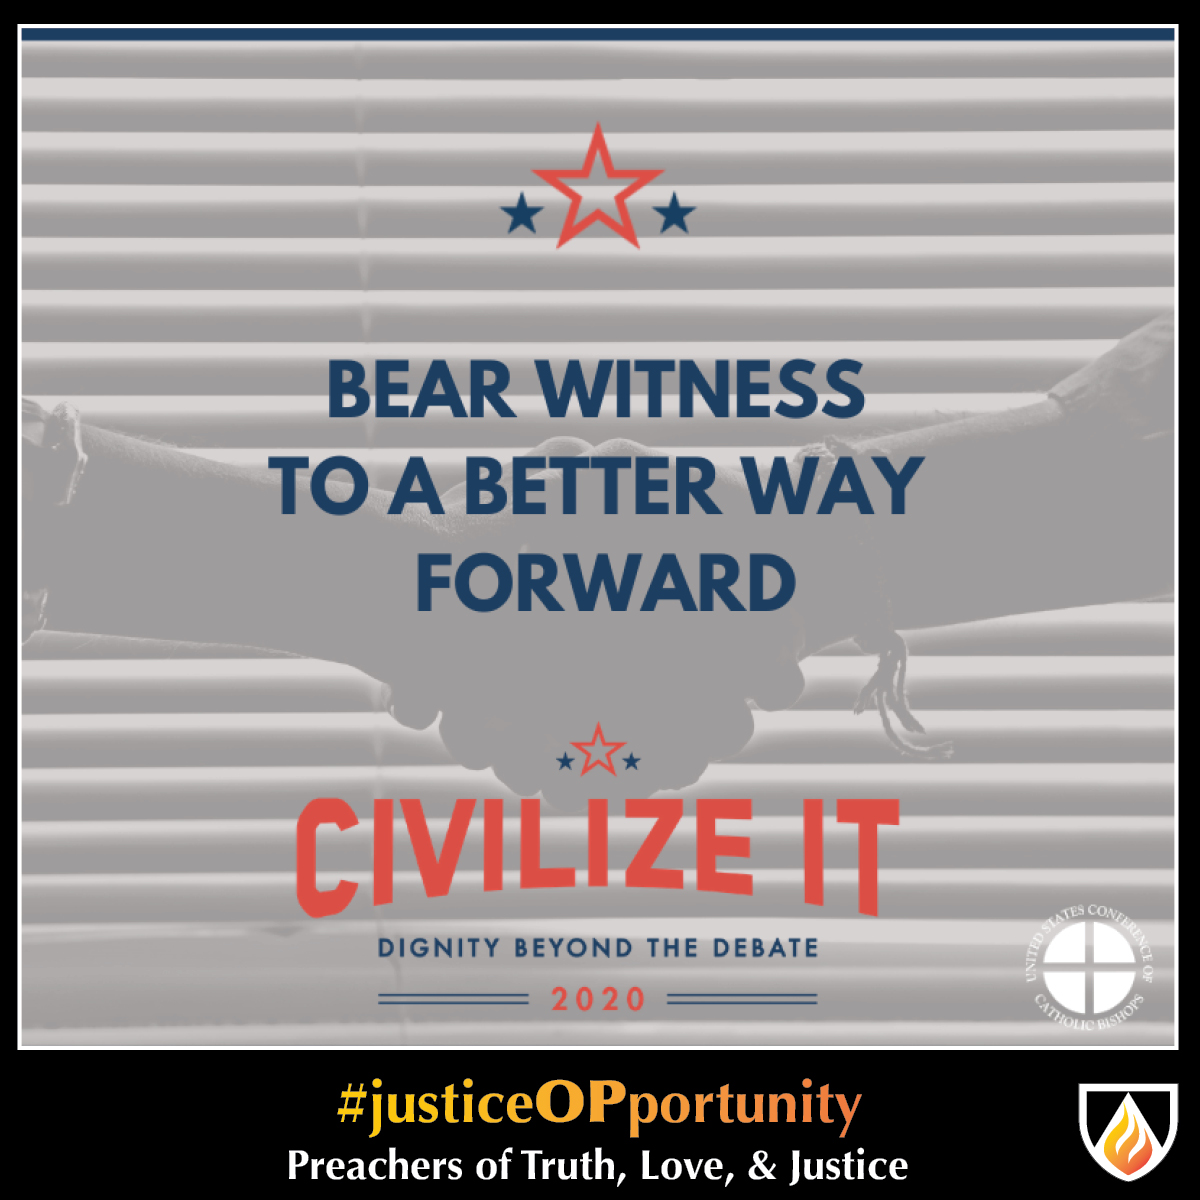 #justiceOPportunity Thursday: March 26, 2020